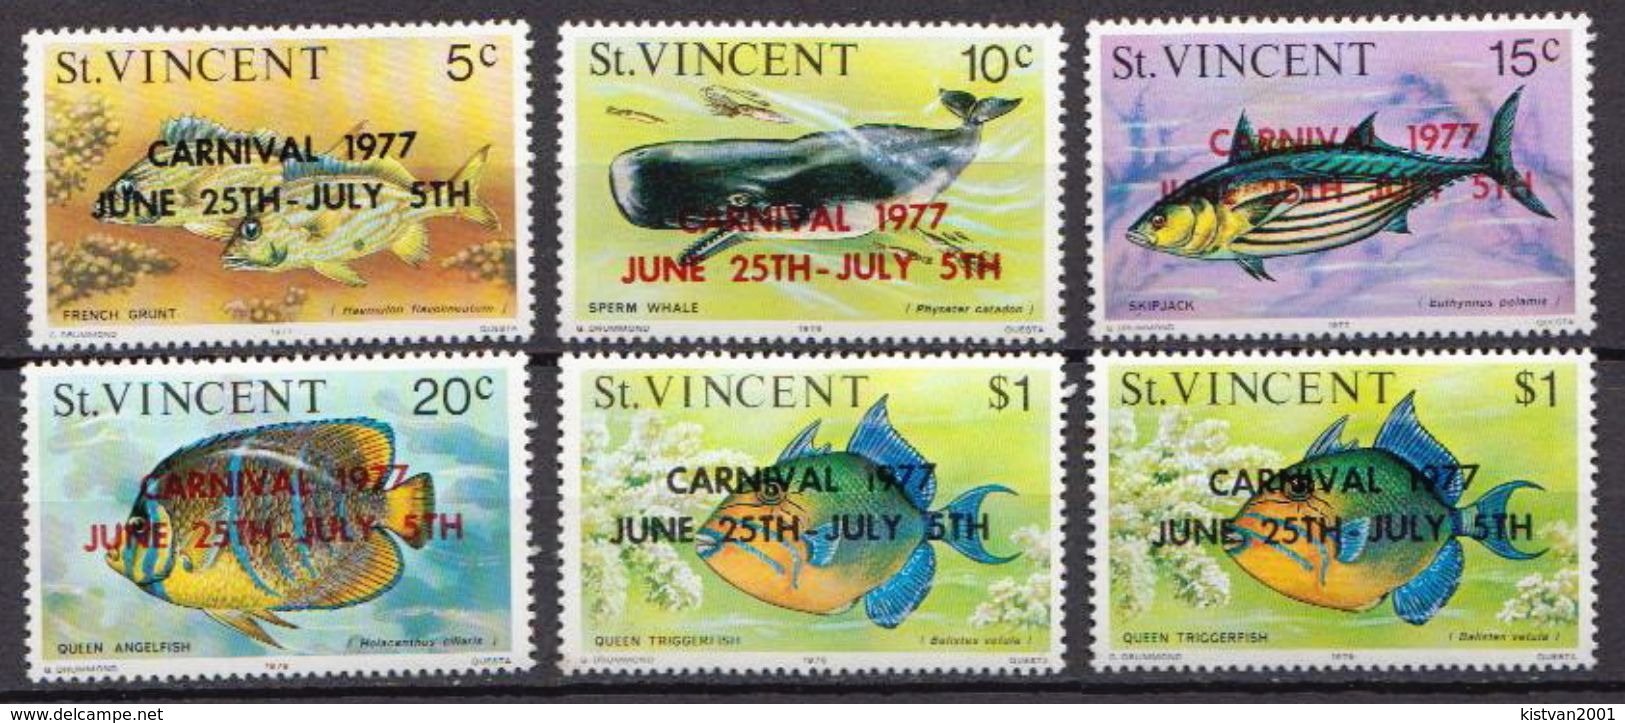 St Vincent MNH Overprinted Set, $1 Stamps With Issue Year 1975 And 1976 - Fishes